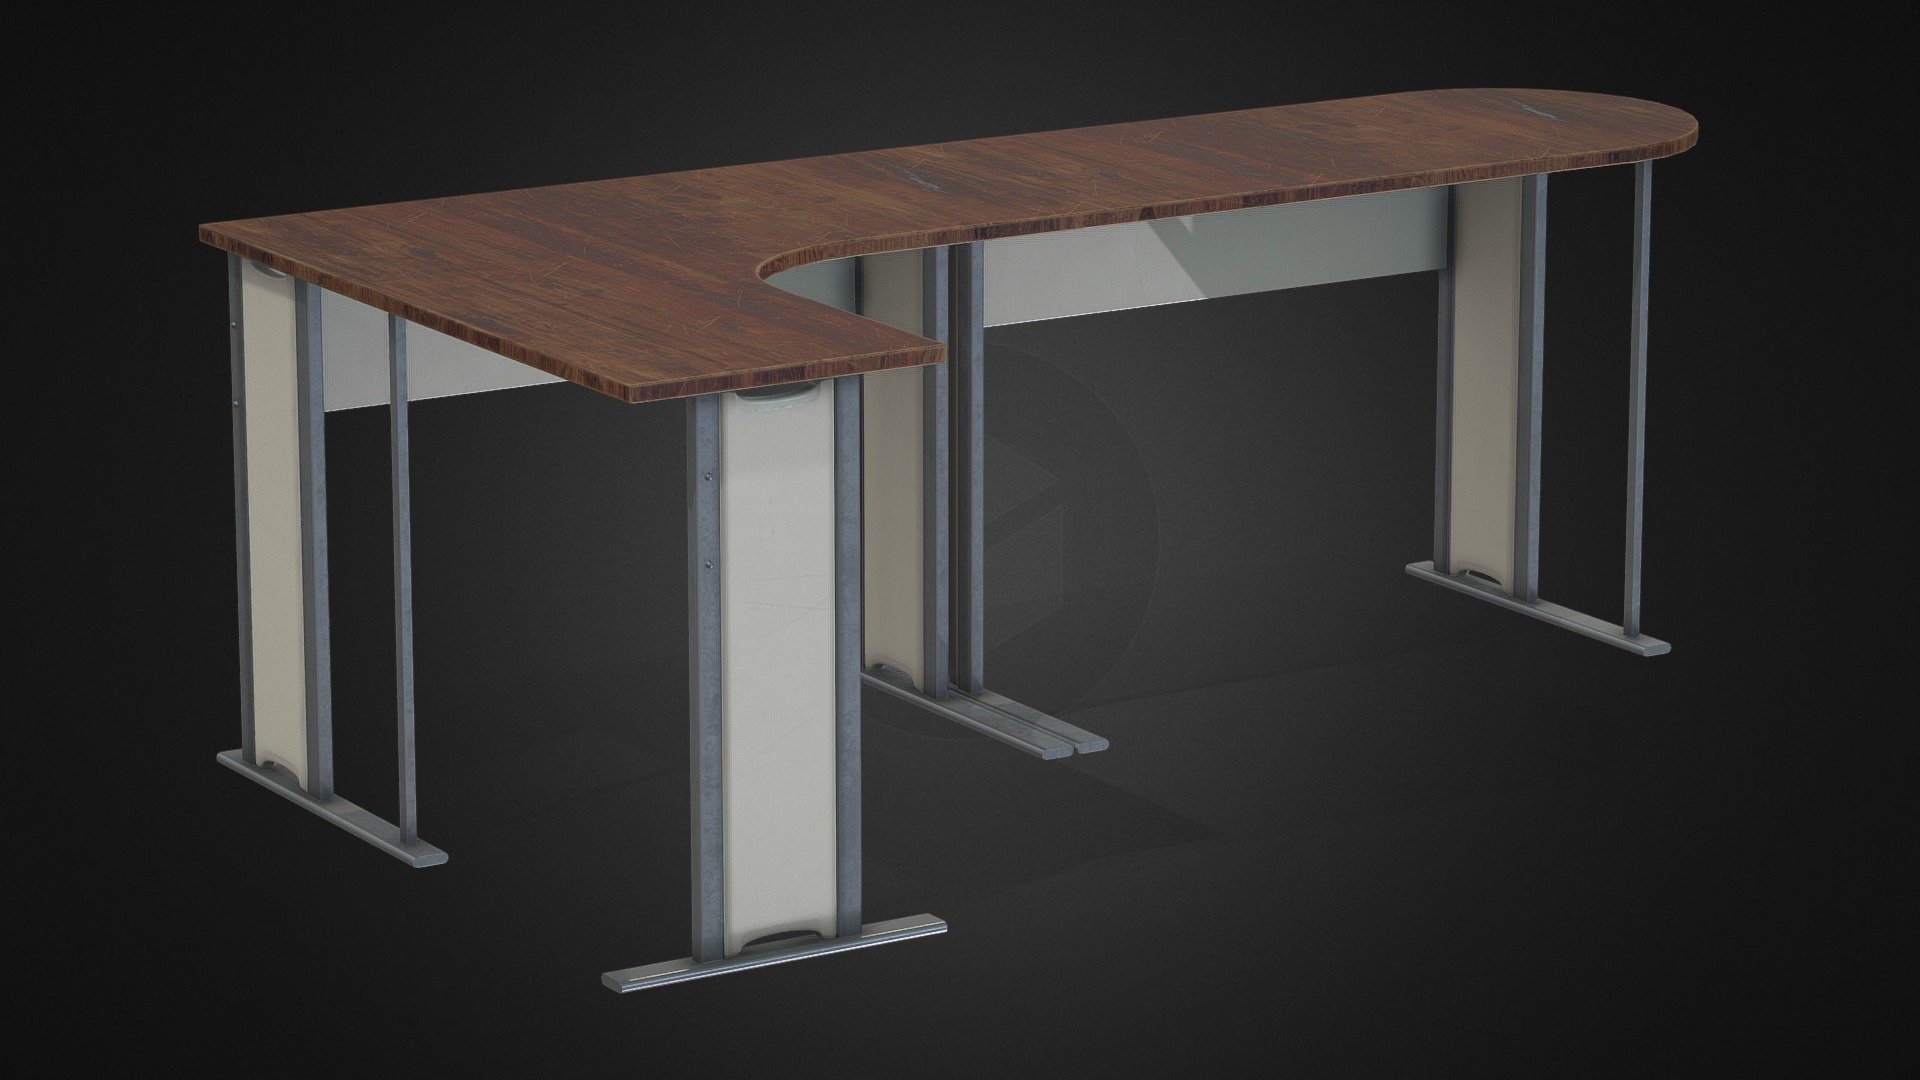 L-shaped Office desk made for my personal project, 4k png textures included:)
Made in 3ds Max, Textured in Substance Painter 3d model